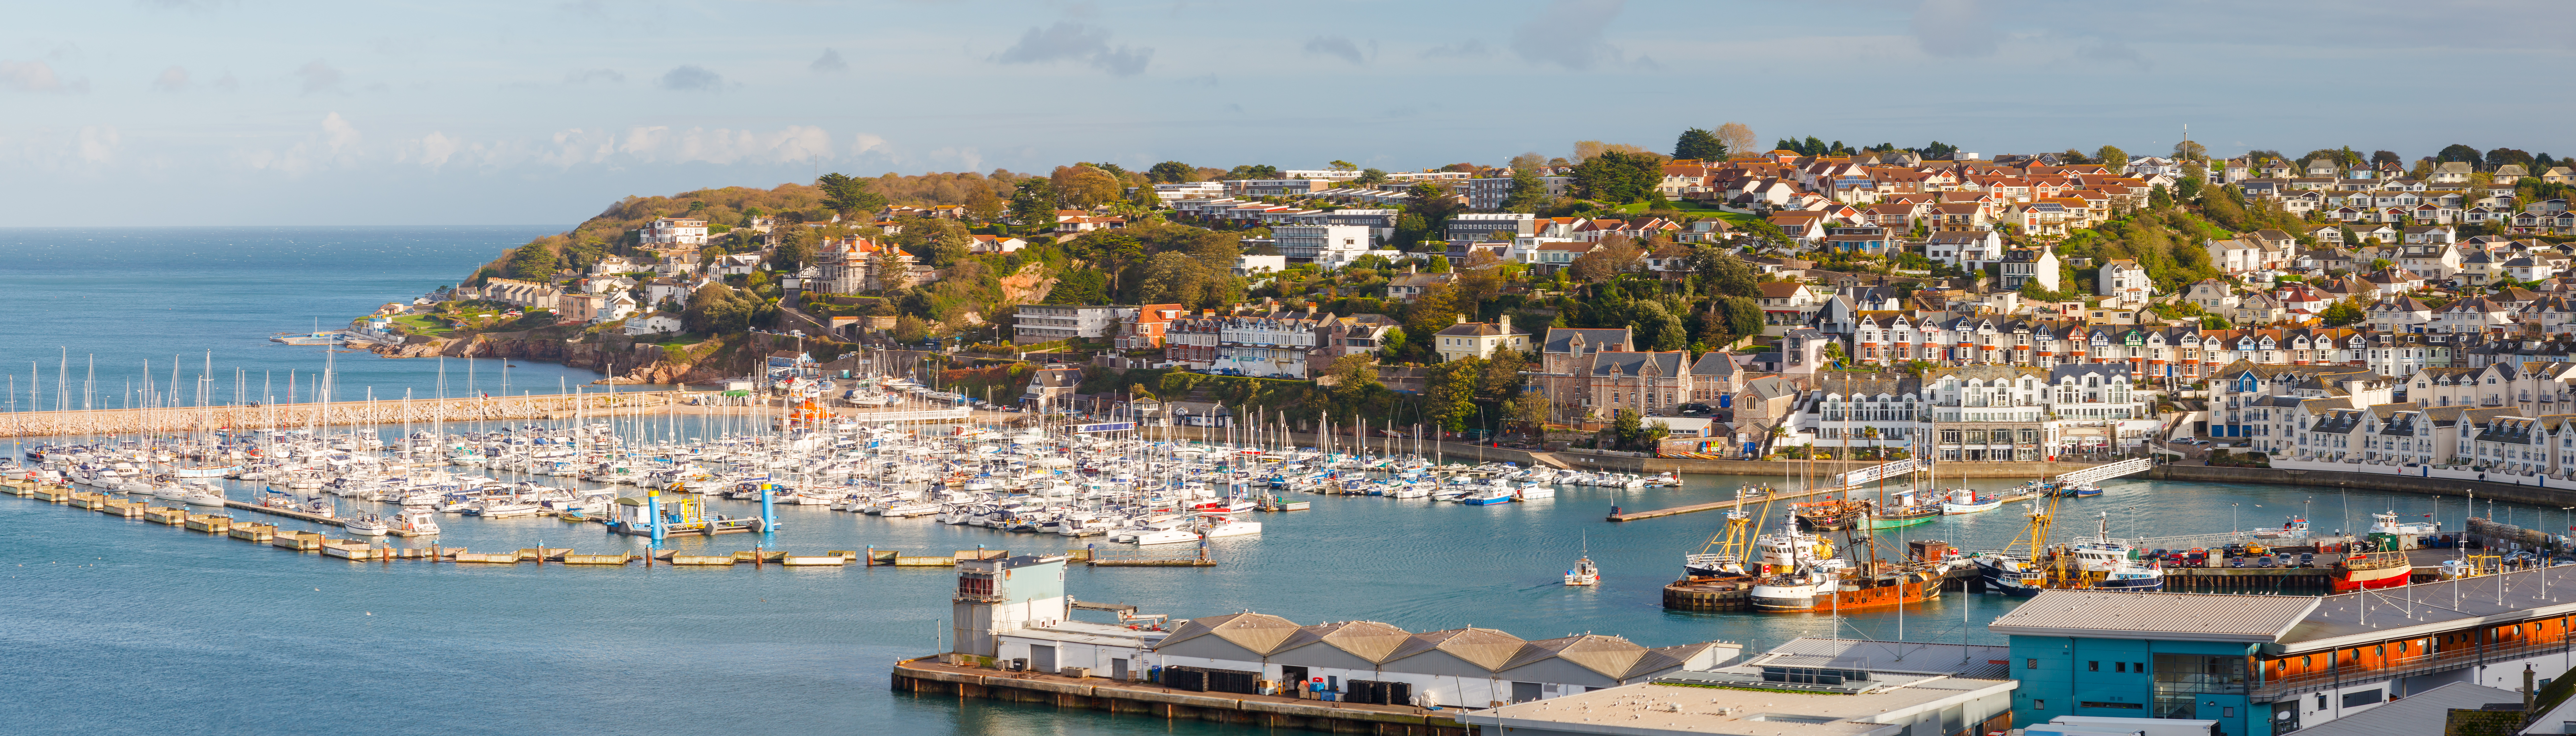 Stock image of Torbay harbour